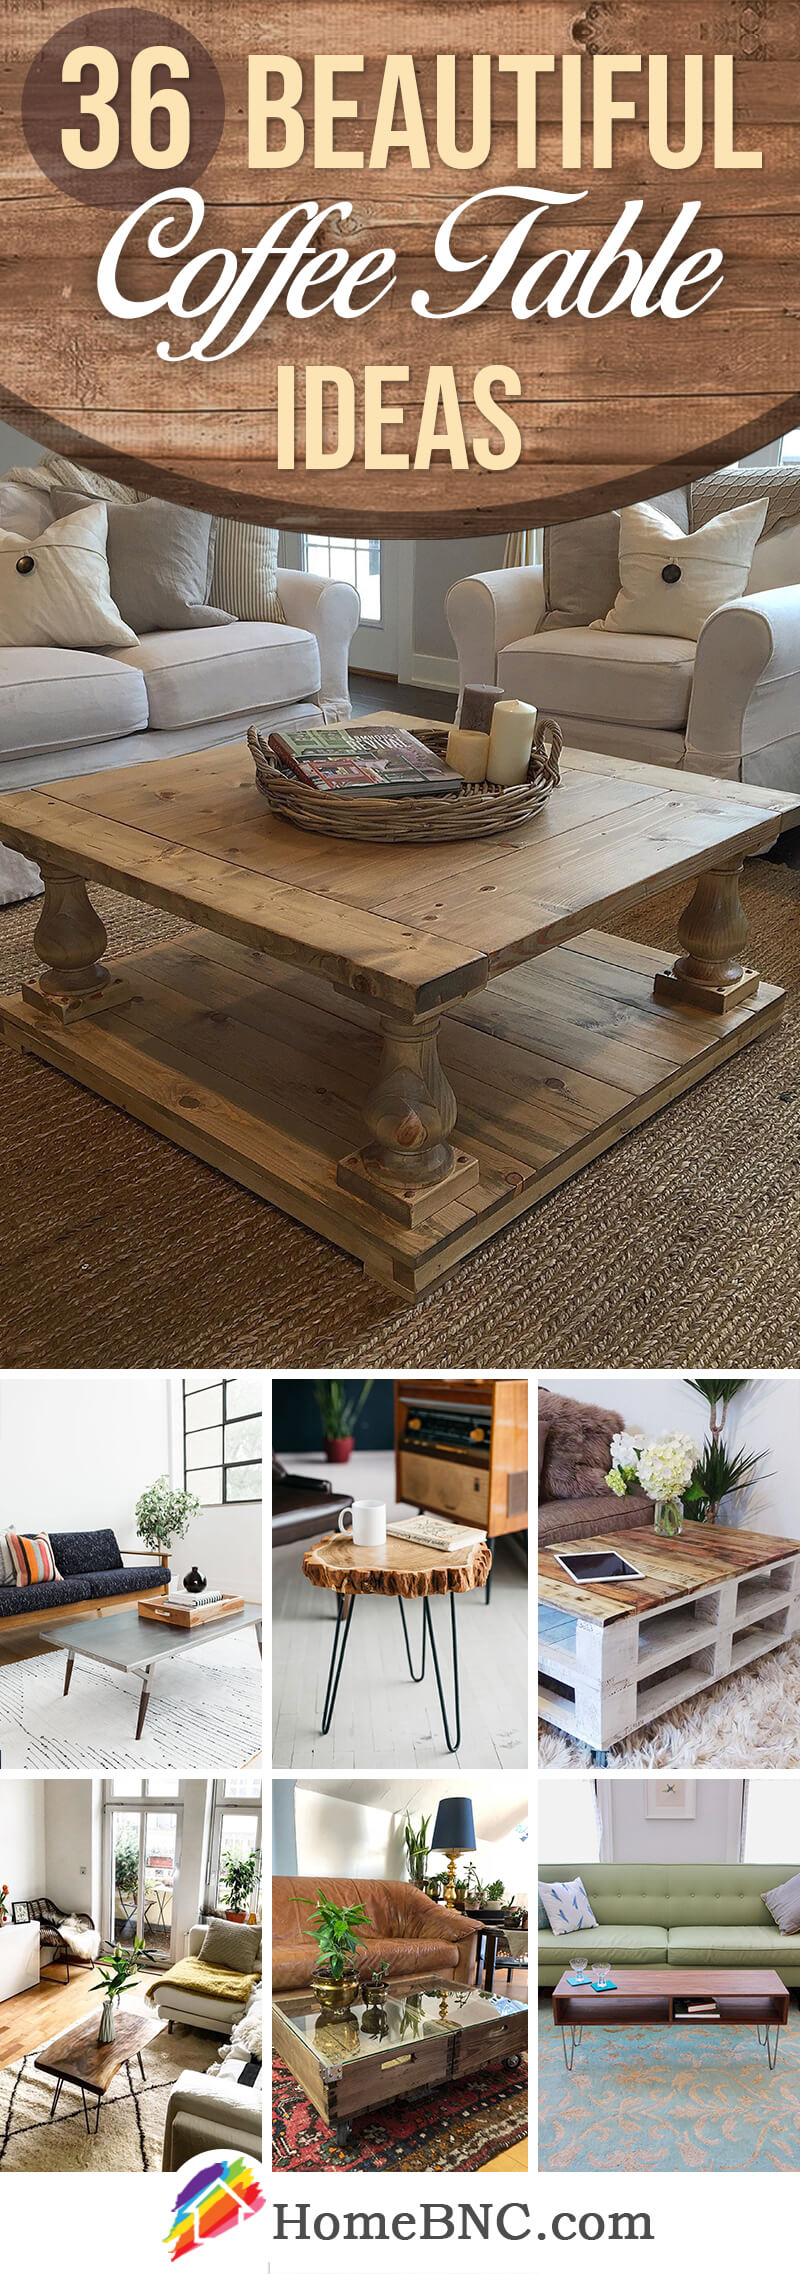 36 Best Coffee Table Ideas And Designs For 2020